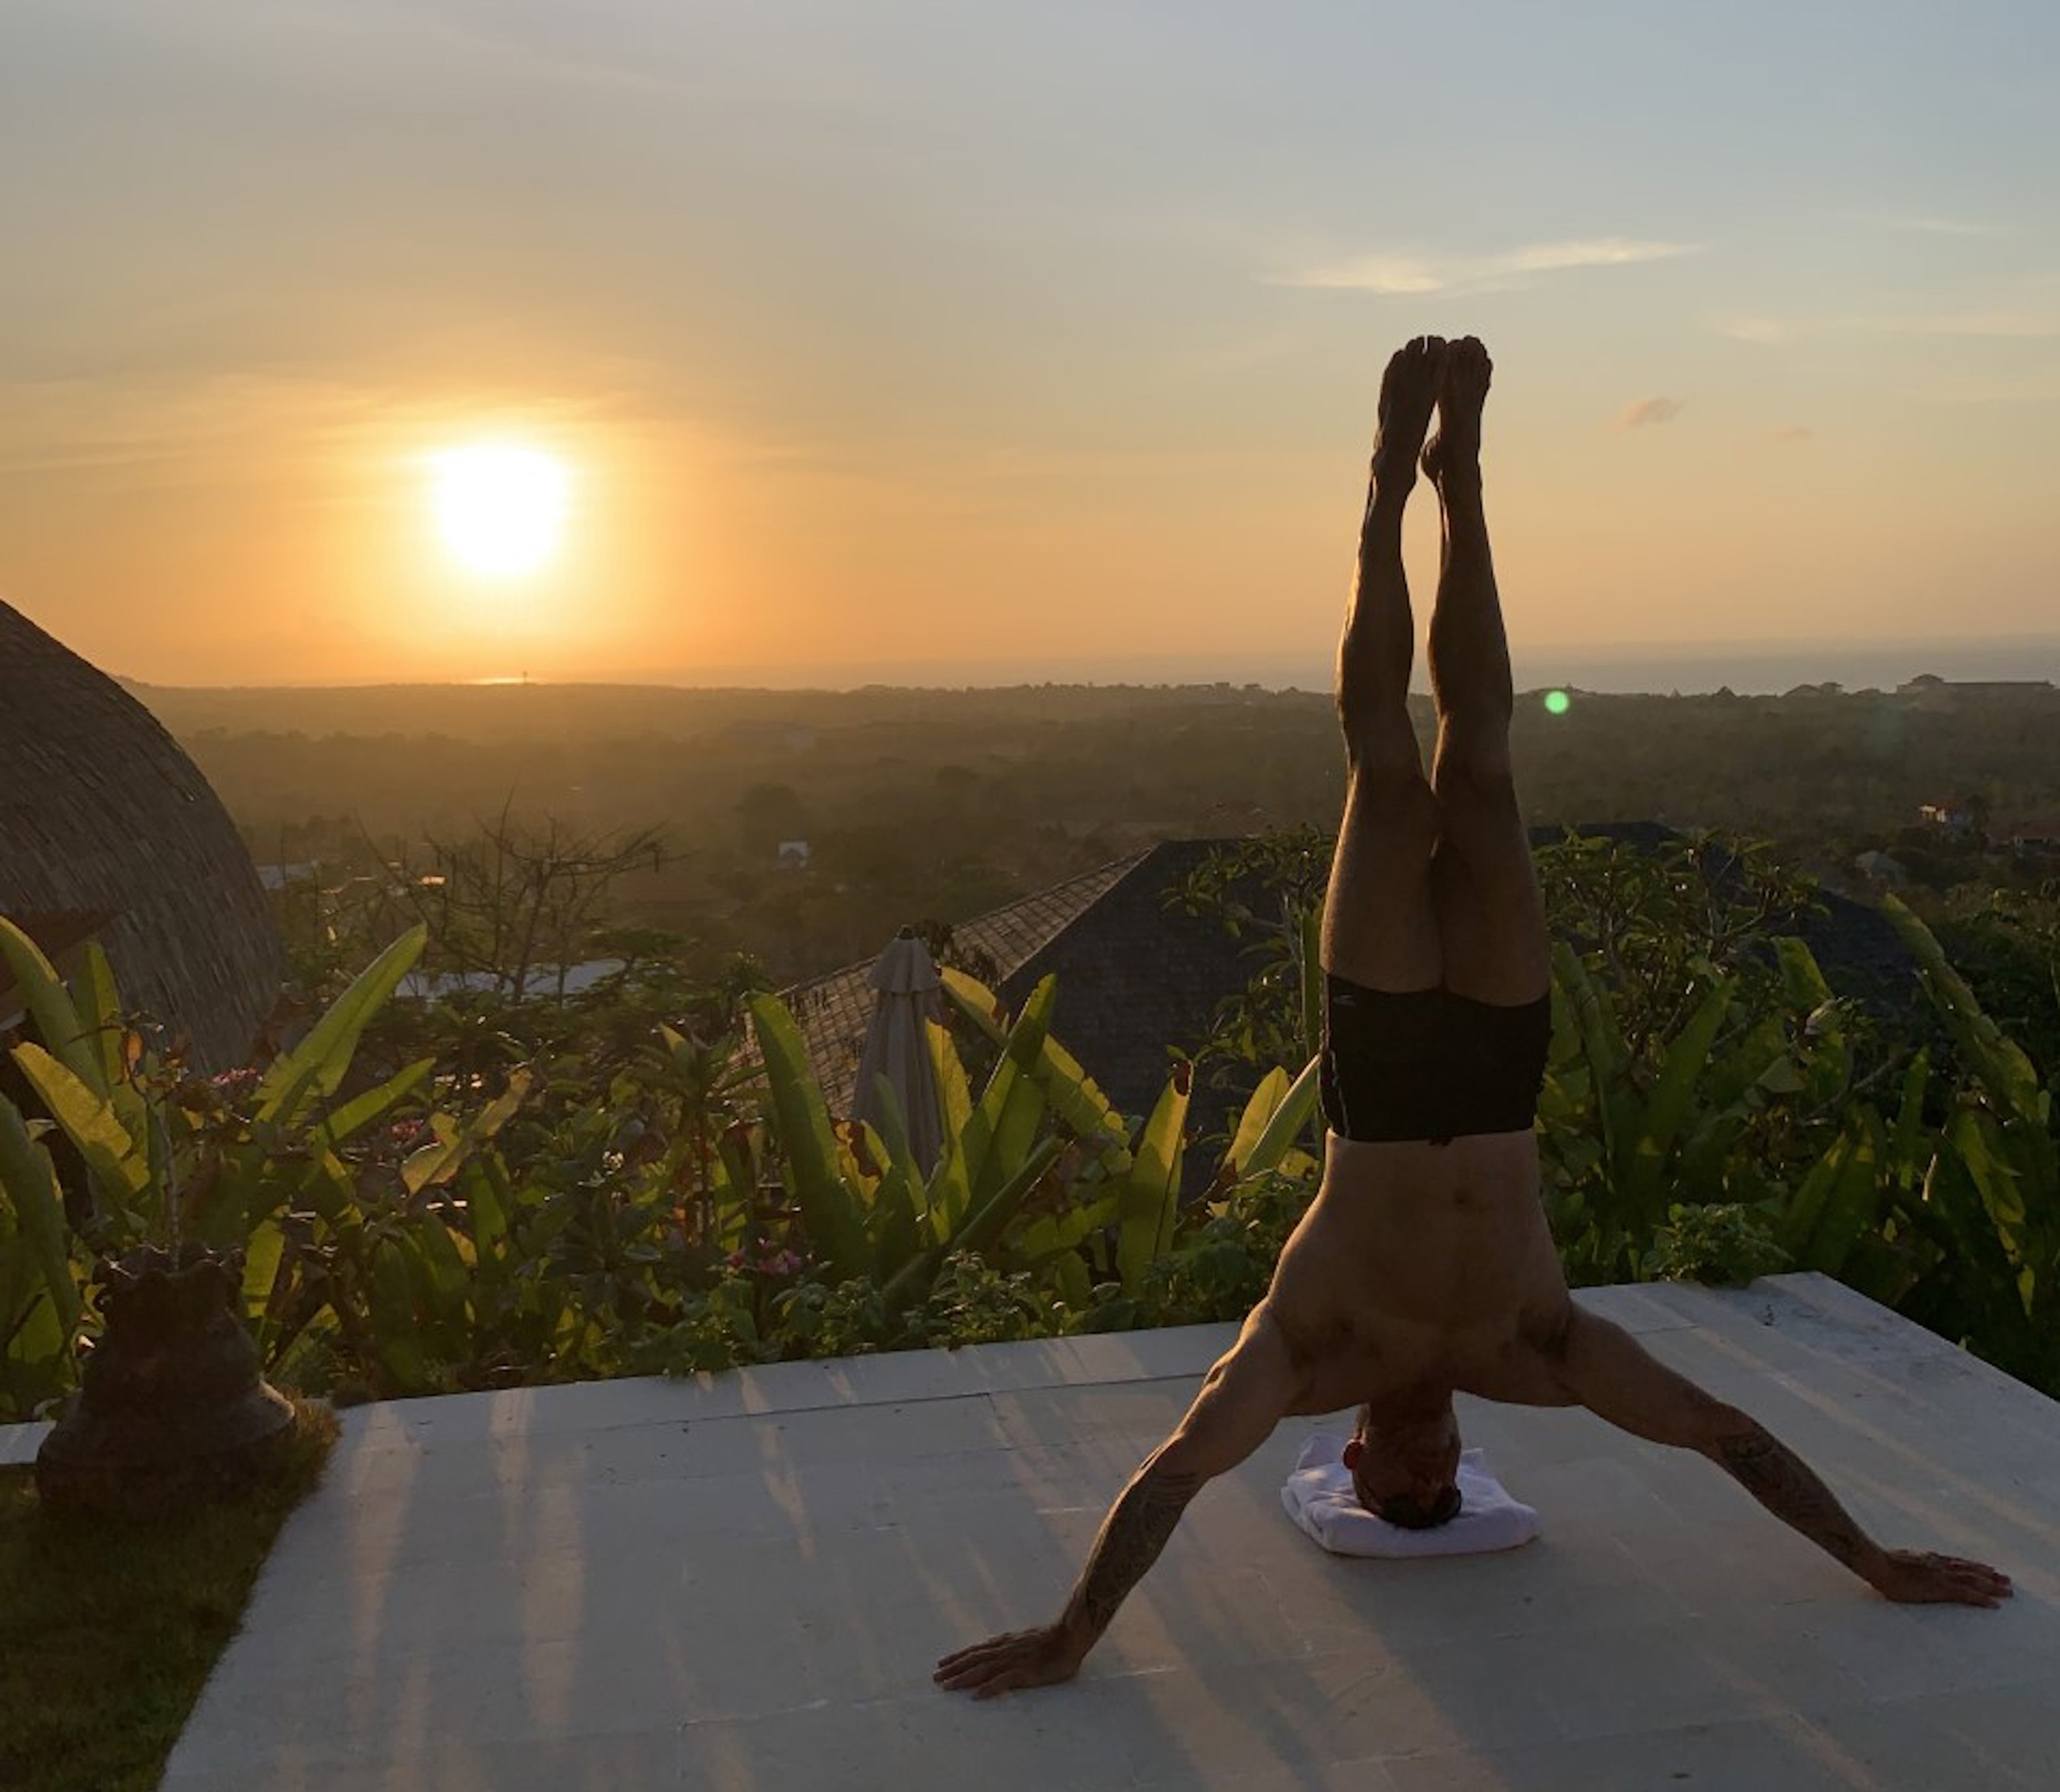 James crossley doing a headstand in bali